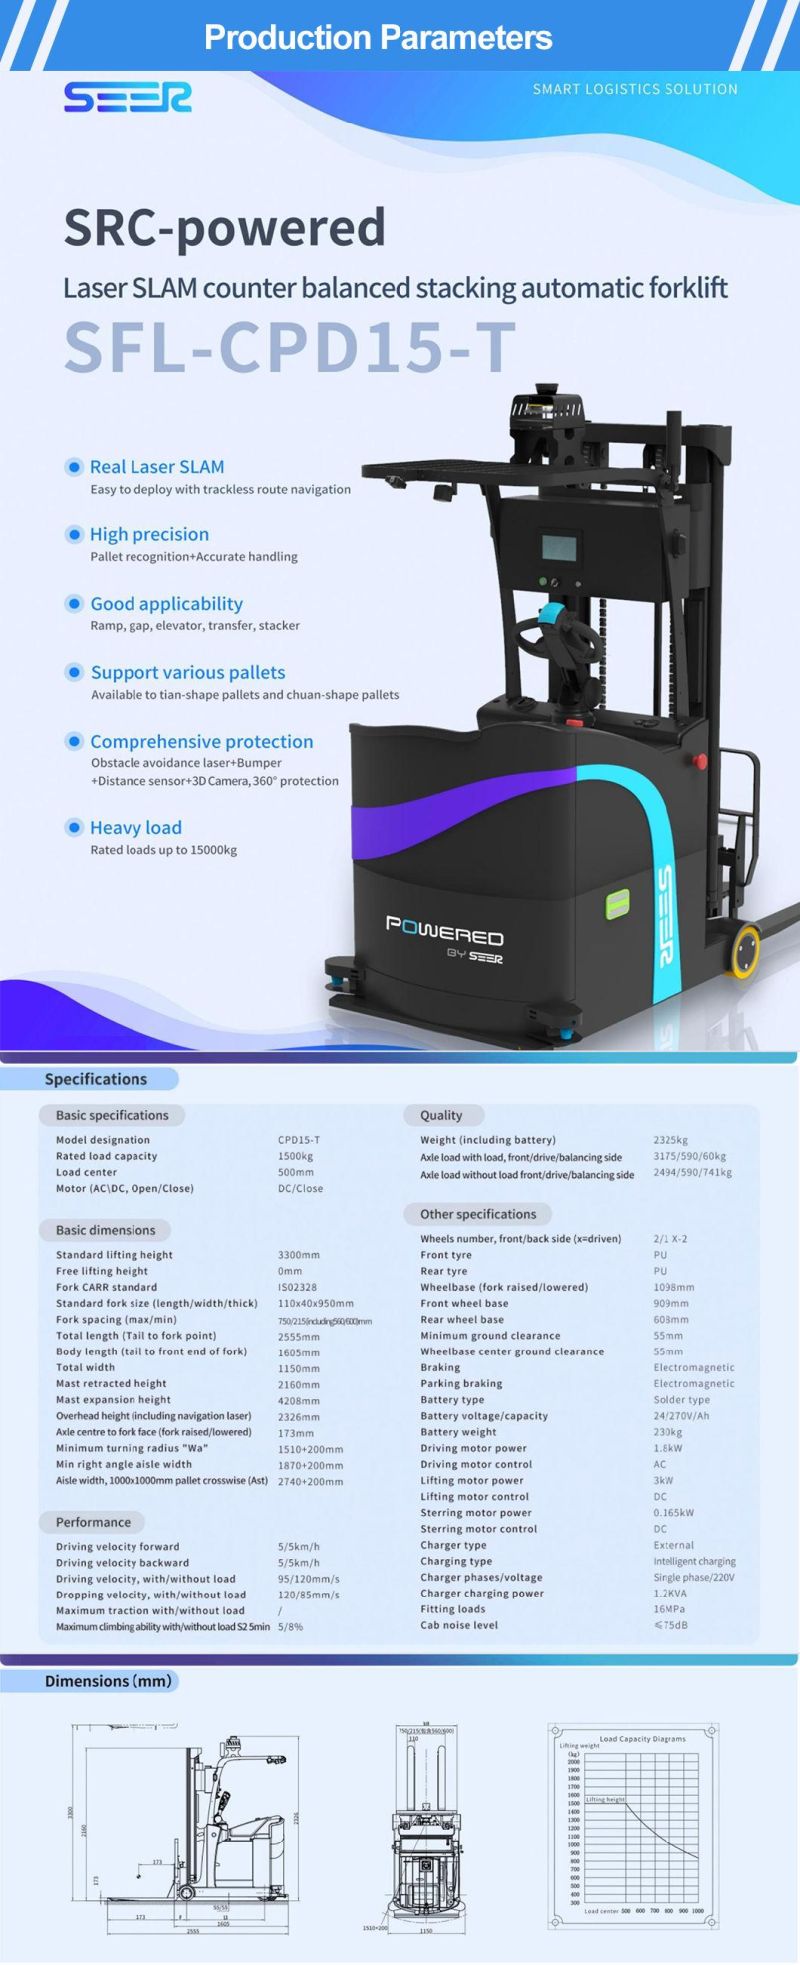 Exquisite Workmanship CNC Machine Src-Powered Laser Slam Small Stacker Forklift Sfl-Cdd14 with Easy Operation